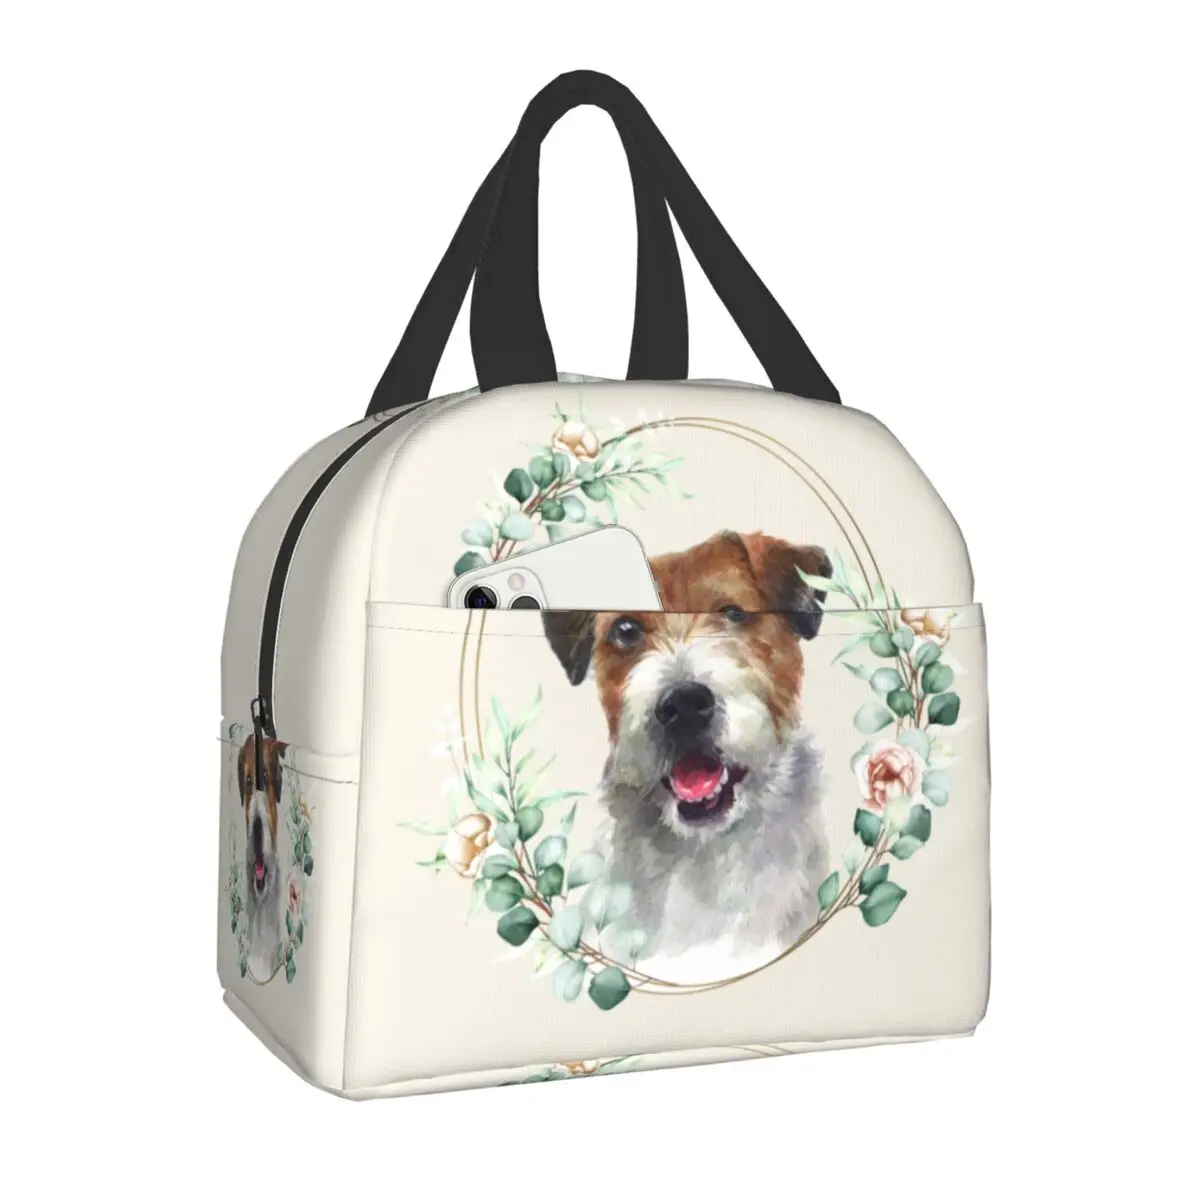 Jack Russell Terrier Dog In Floral Insulated Lunch Bag for Women Resuable Pet Lover Cooler Thermal Lunch Box Picnic Travel Bags